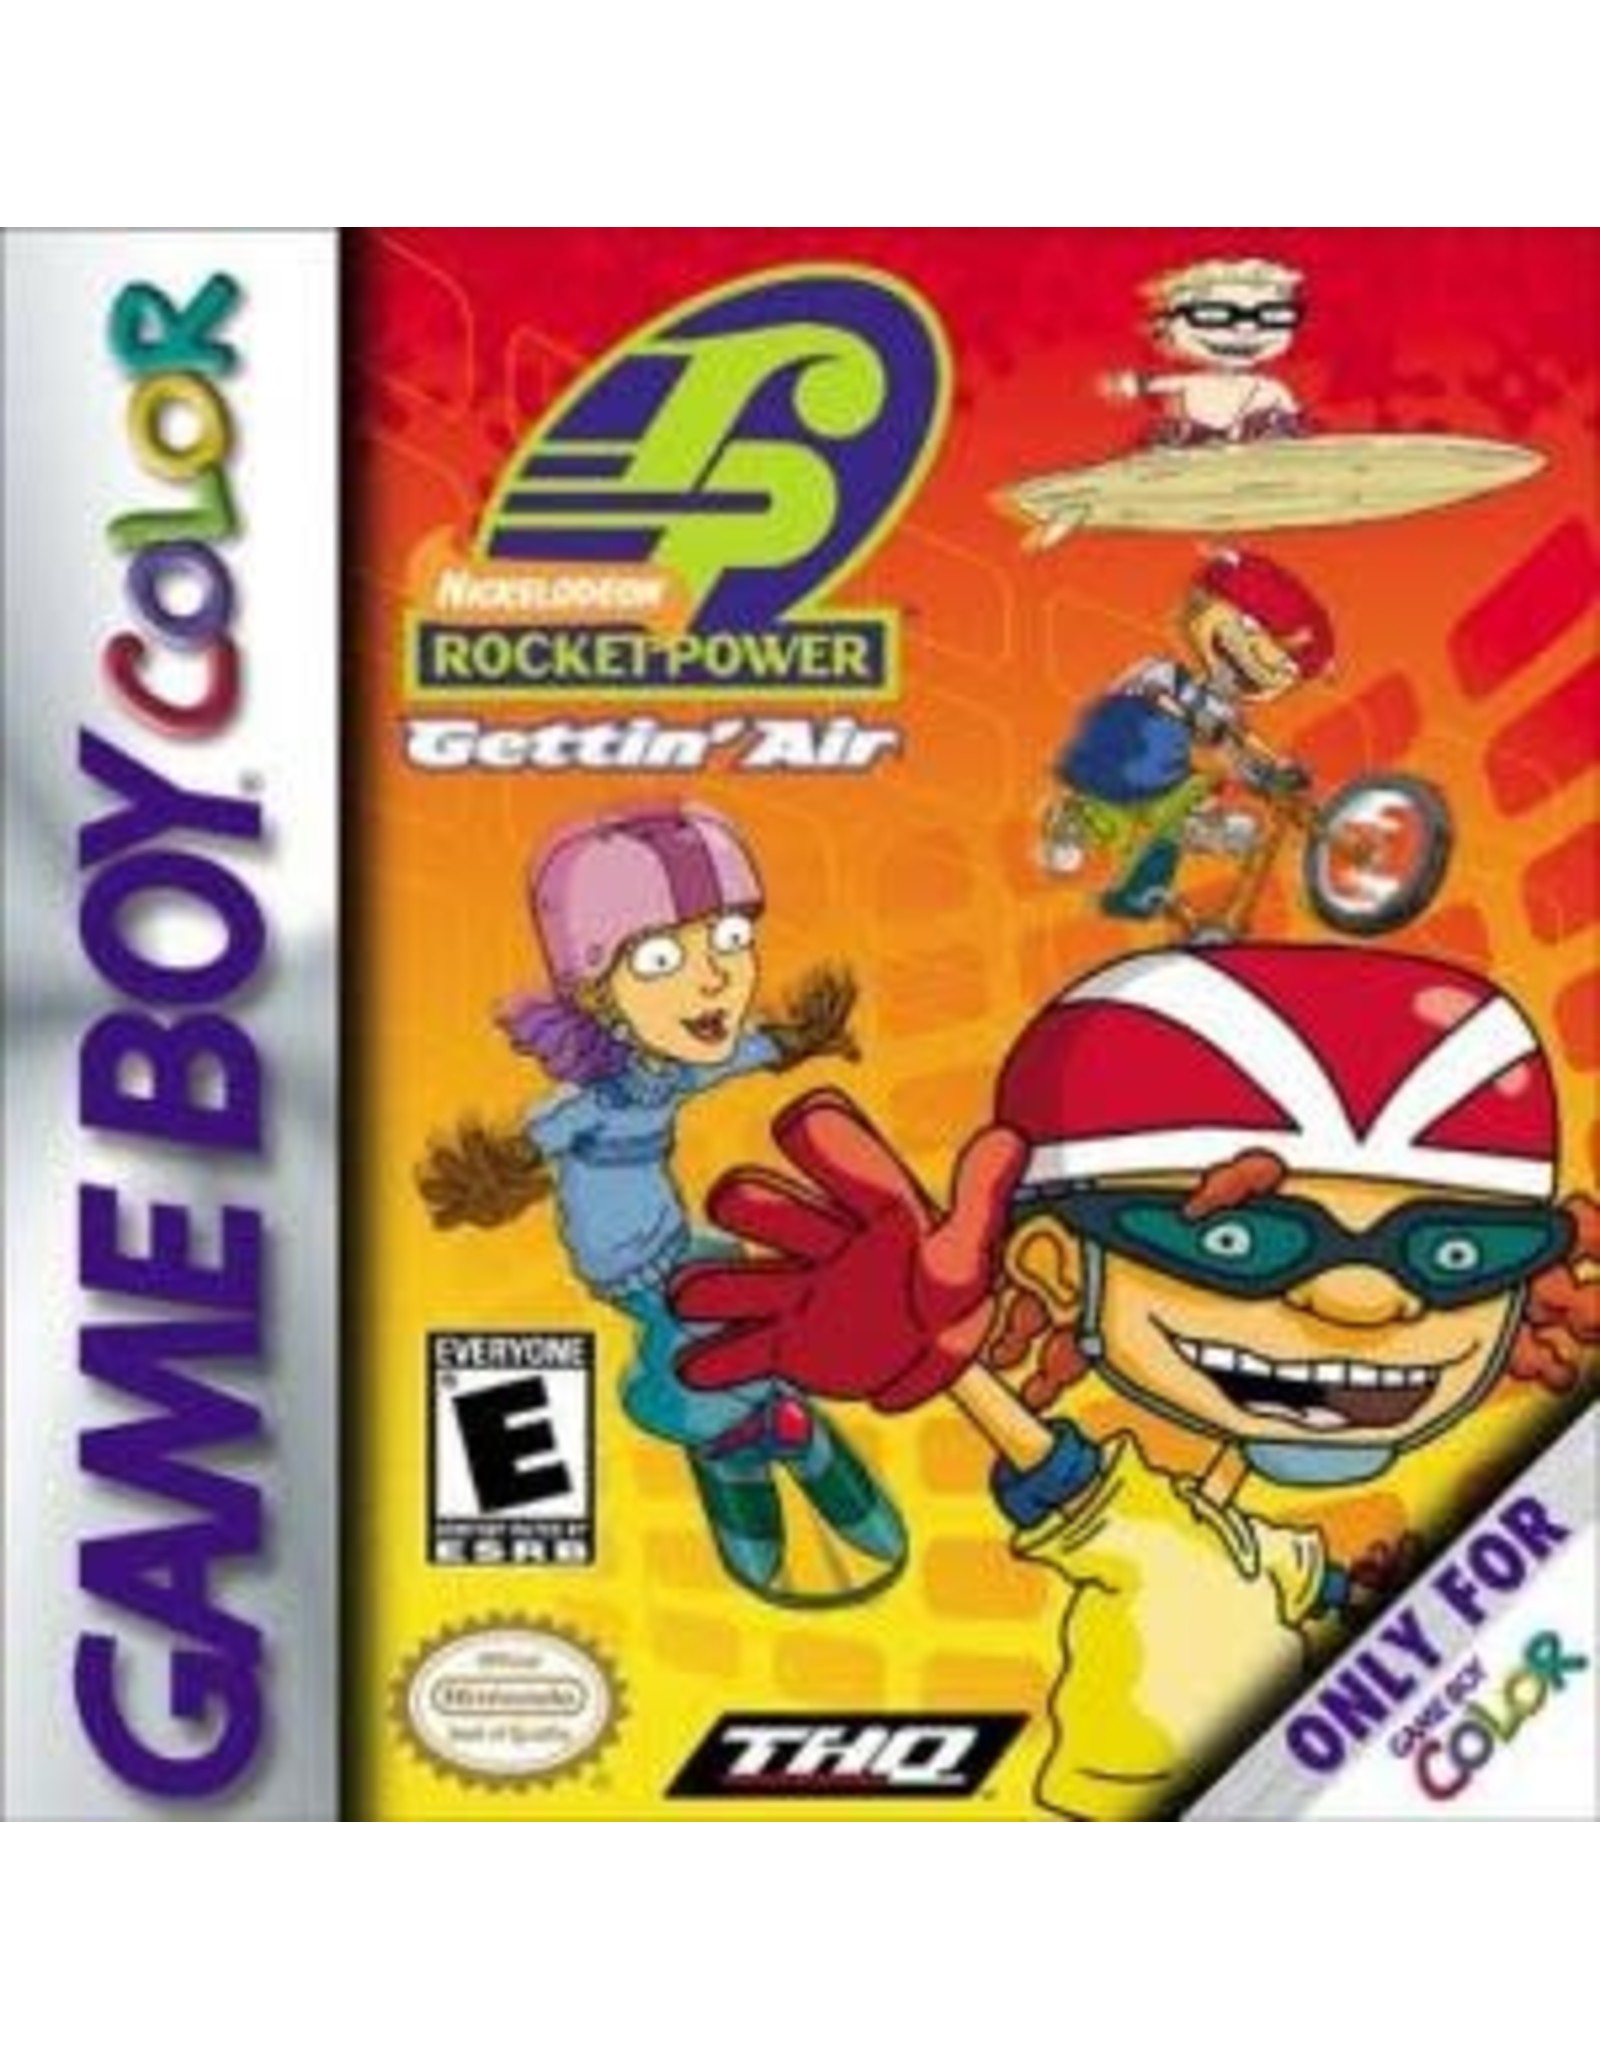 Game Boy Color Rocket Power Getting Air (Cart Only)